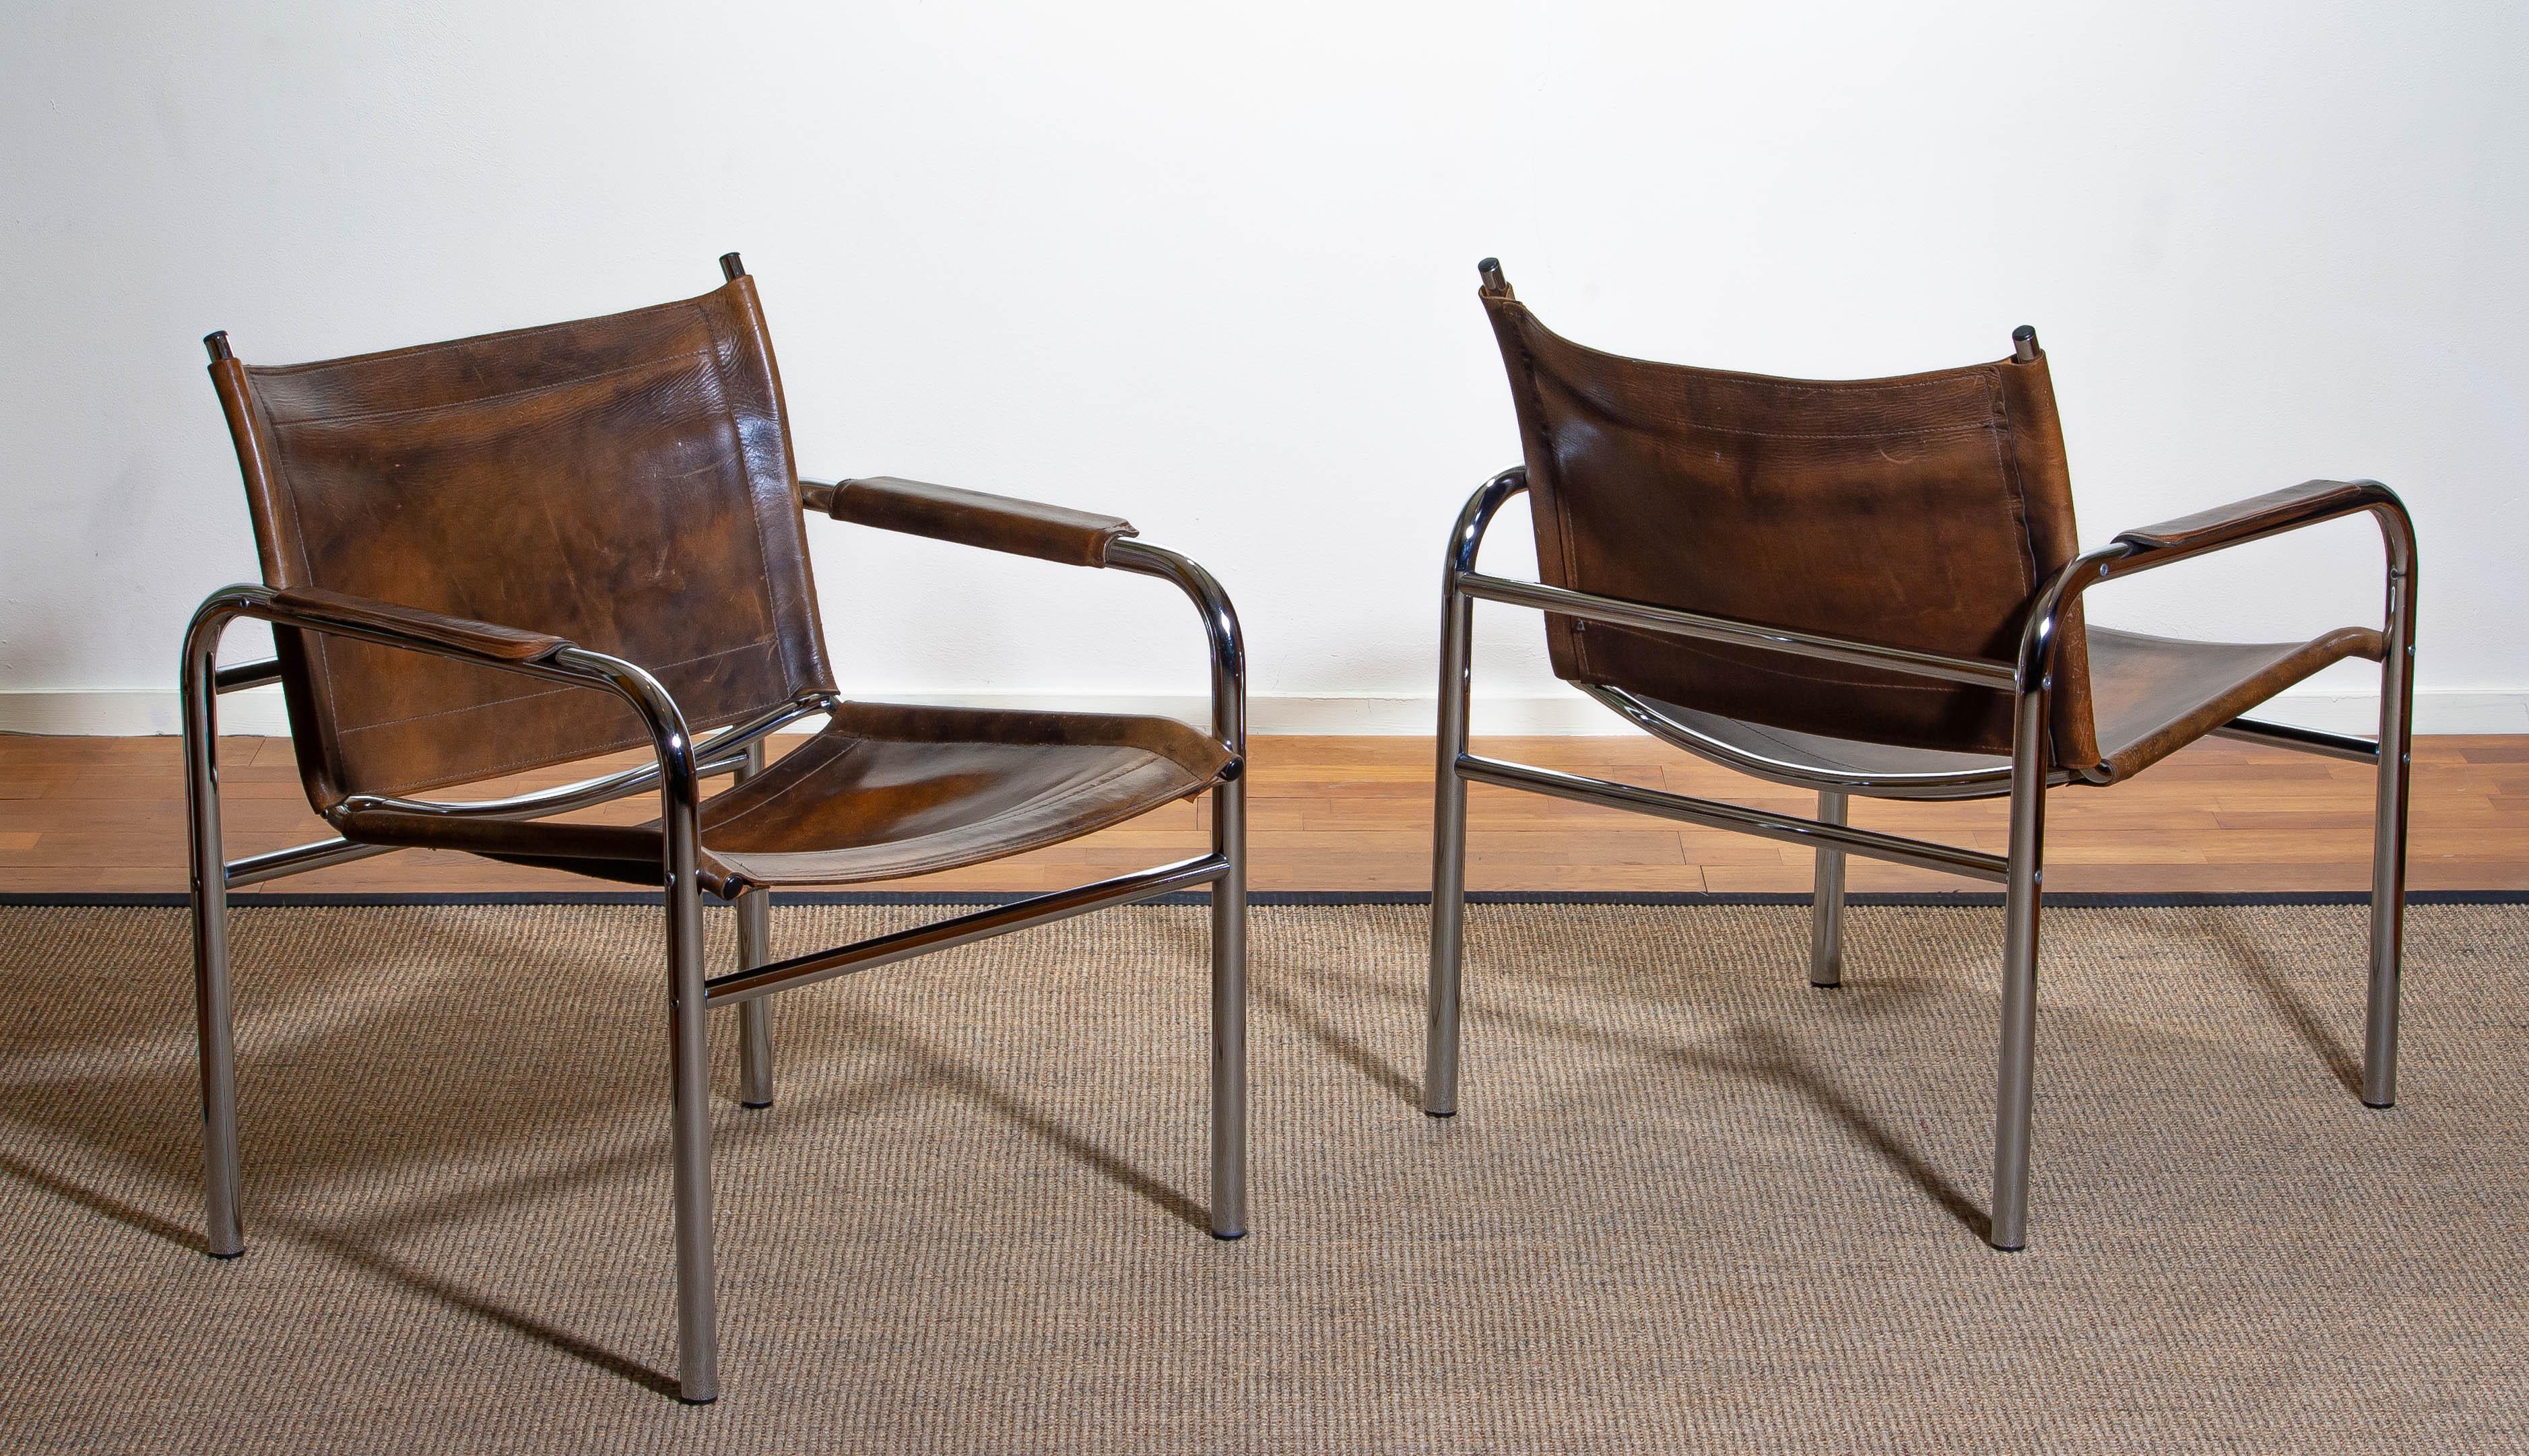 1980s, Pair of Leather and Tubular Steel Armchairs by Tord Bjorklund, Sweden  2